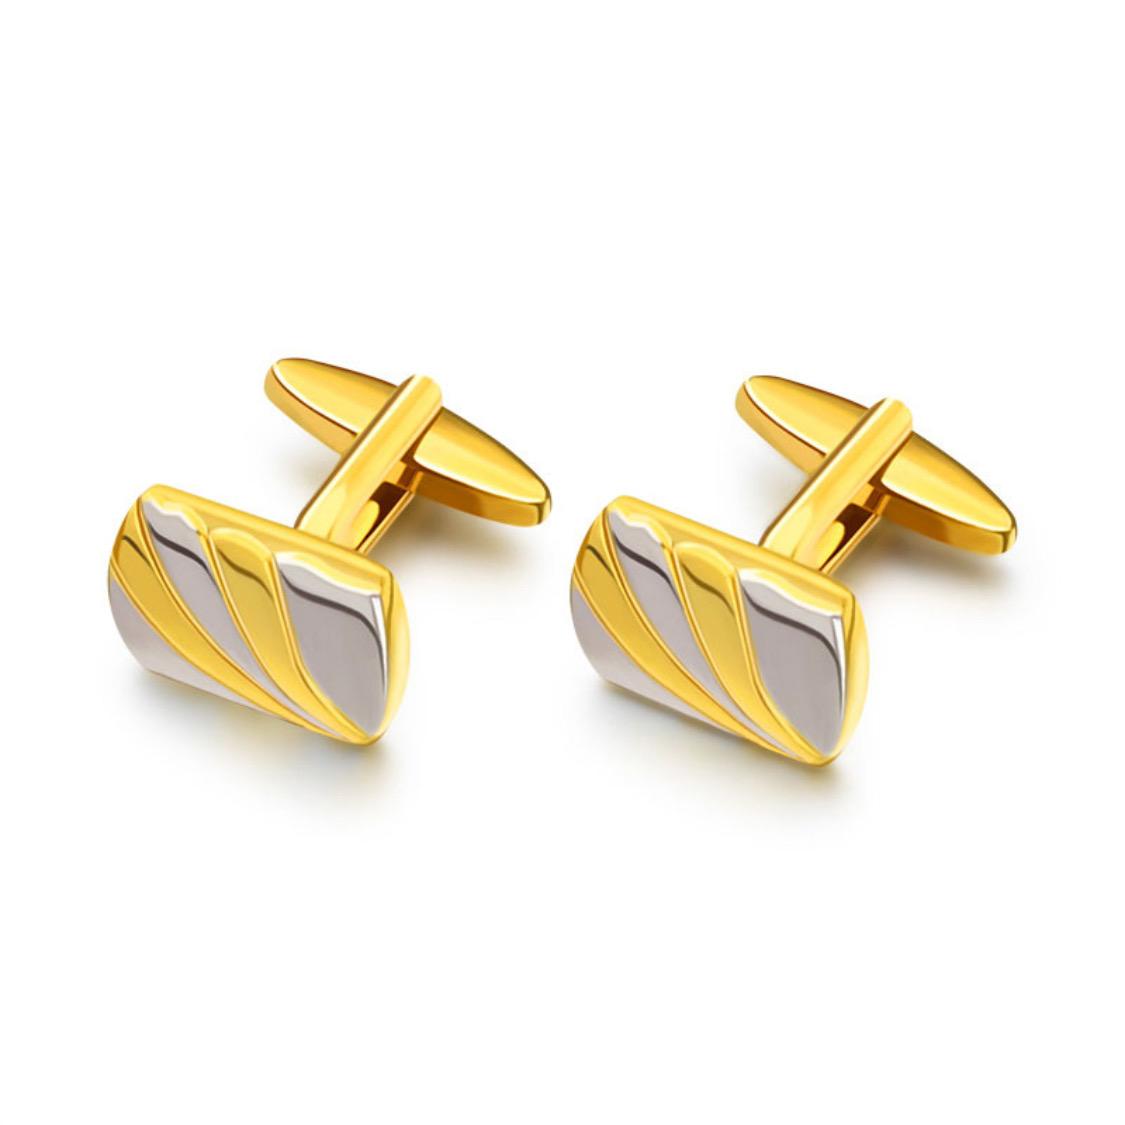 Buy Exquisite Cufflinks for Men's Shirts - Elevate Your Style | LABLACK